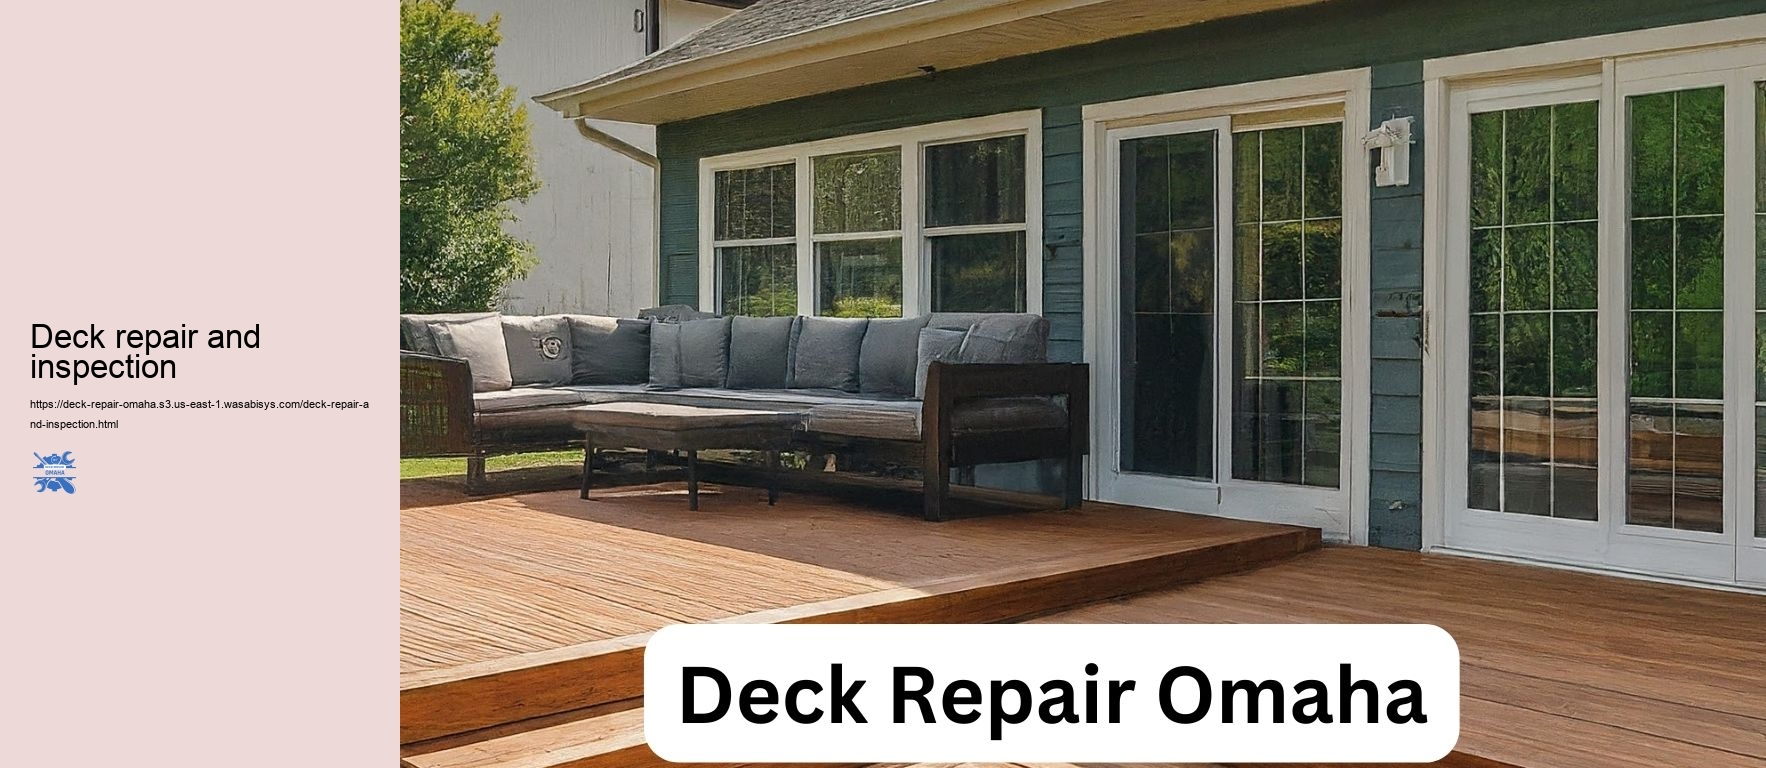 Deck repair and inspection